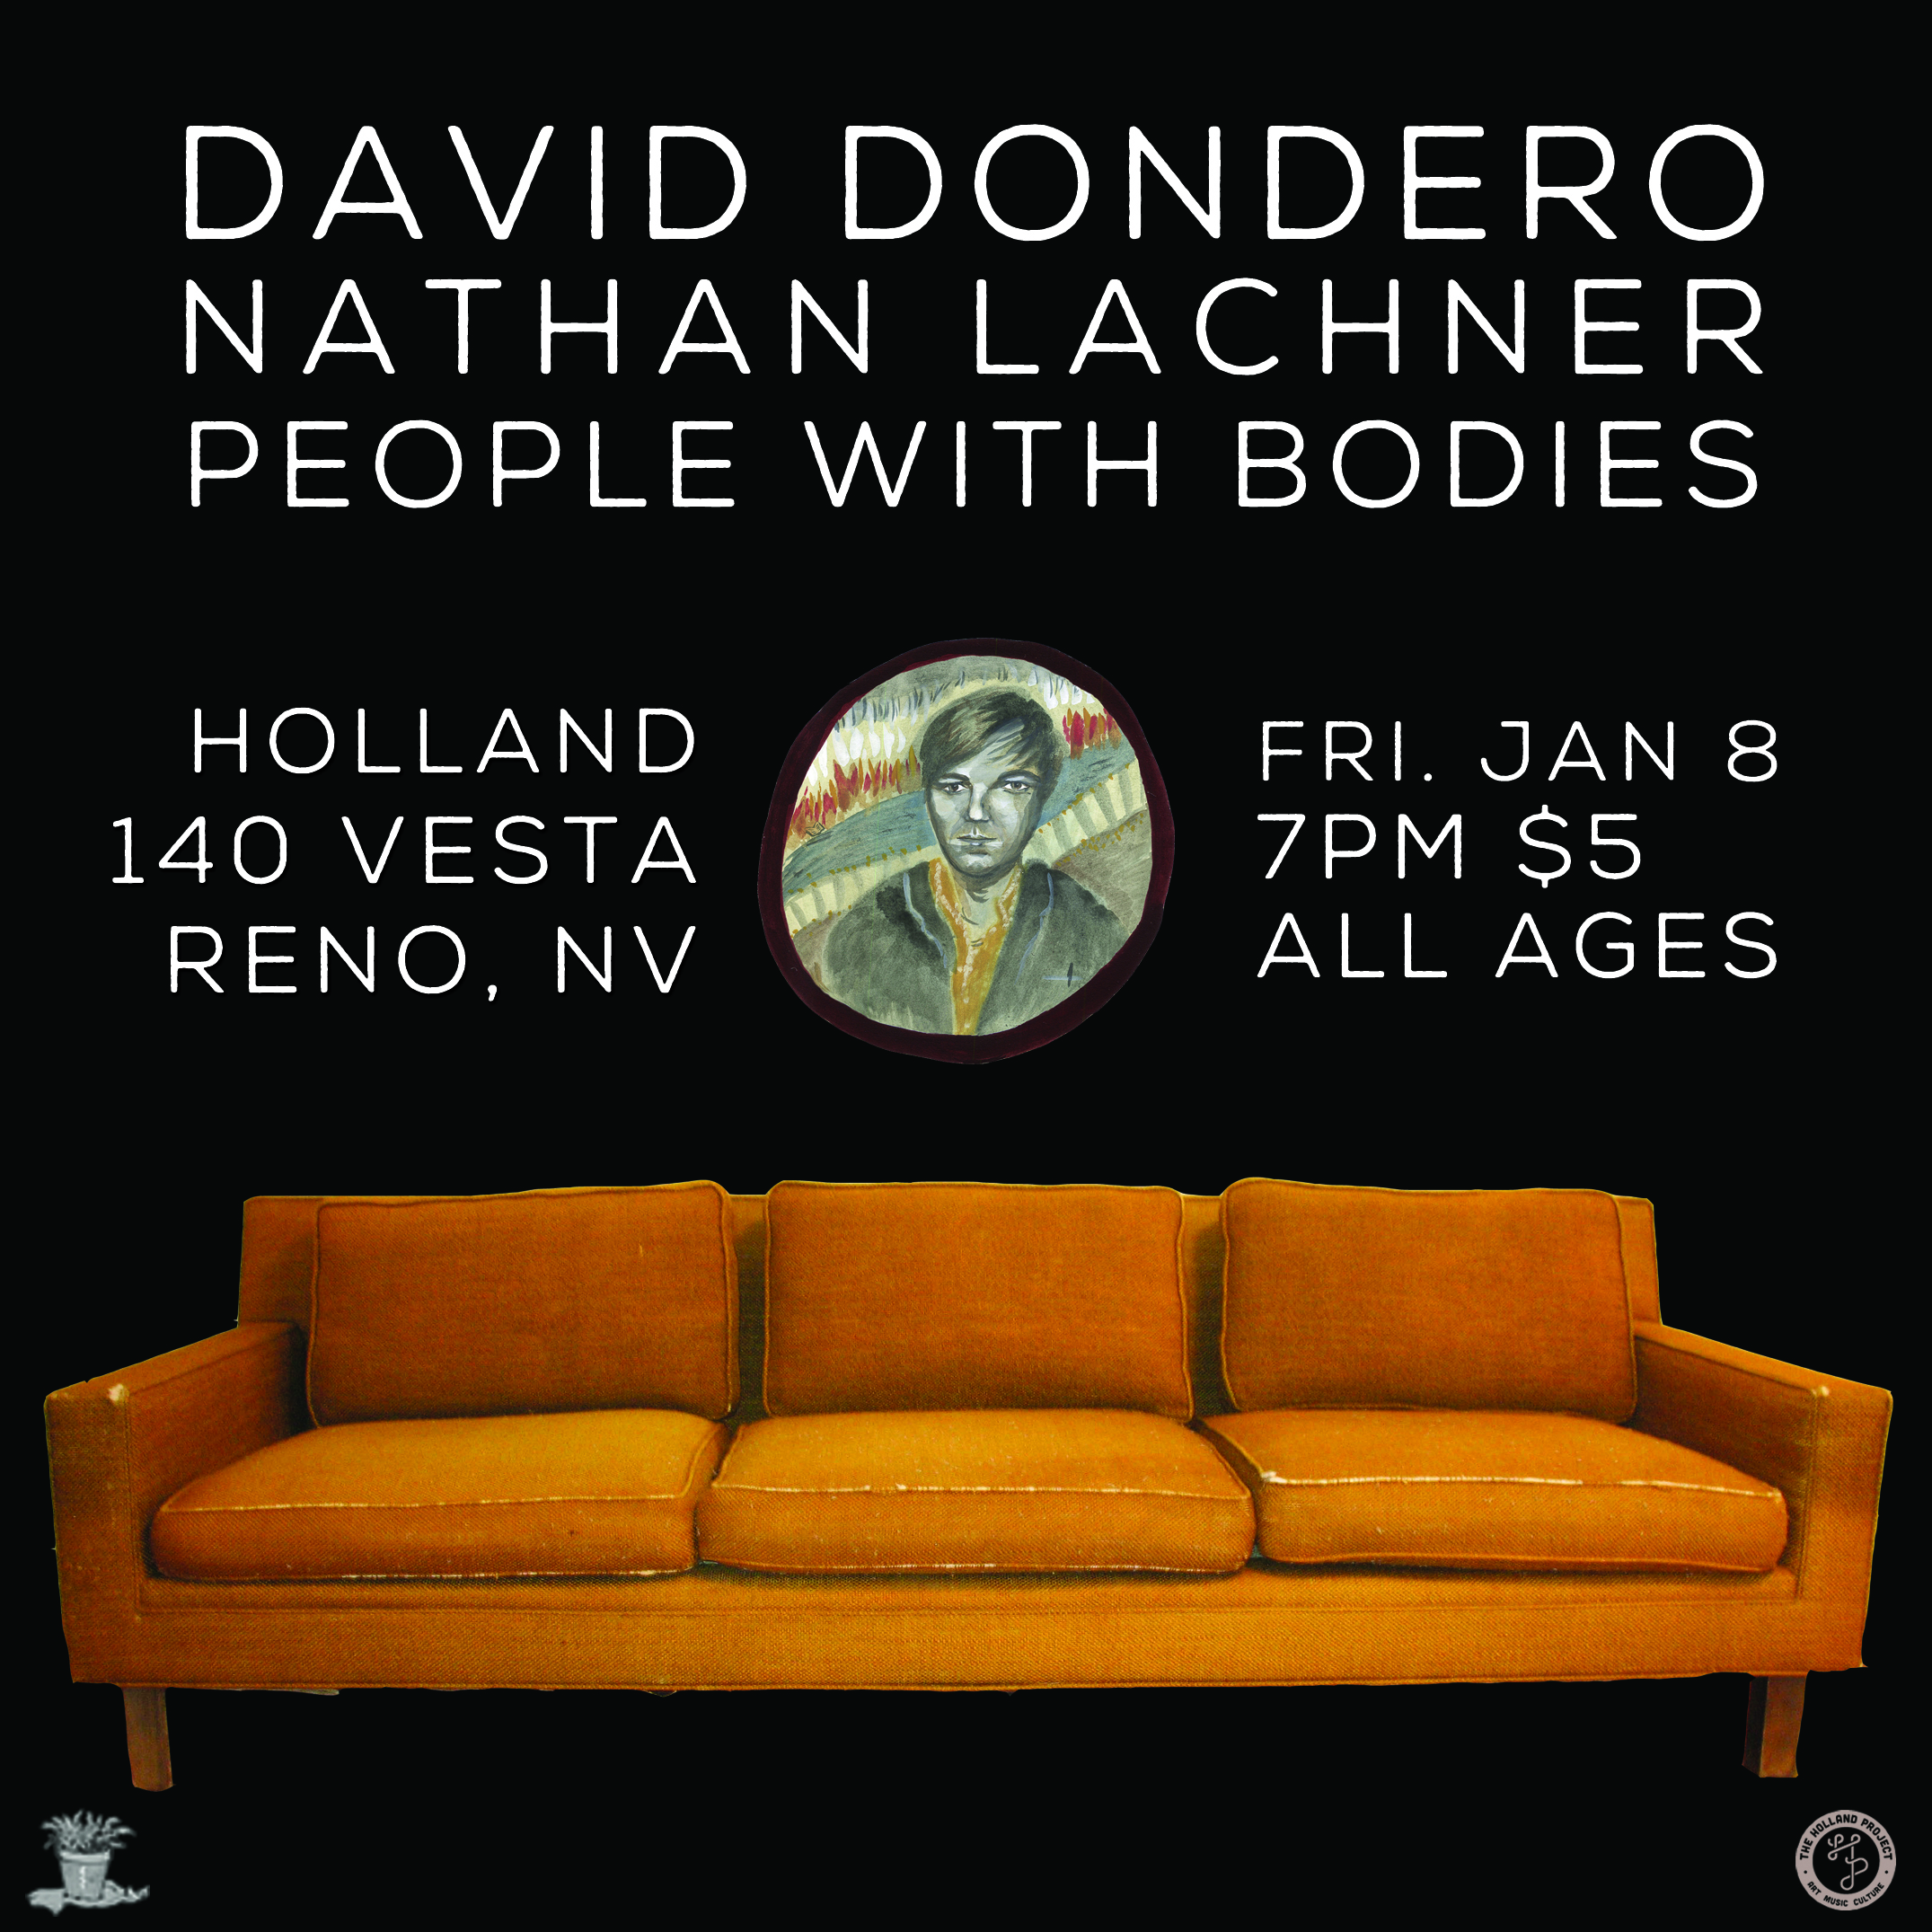 David Dondero, Nathan Lachner, People With Bodies